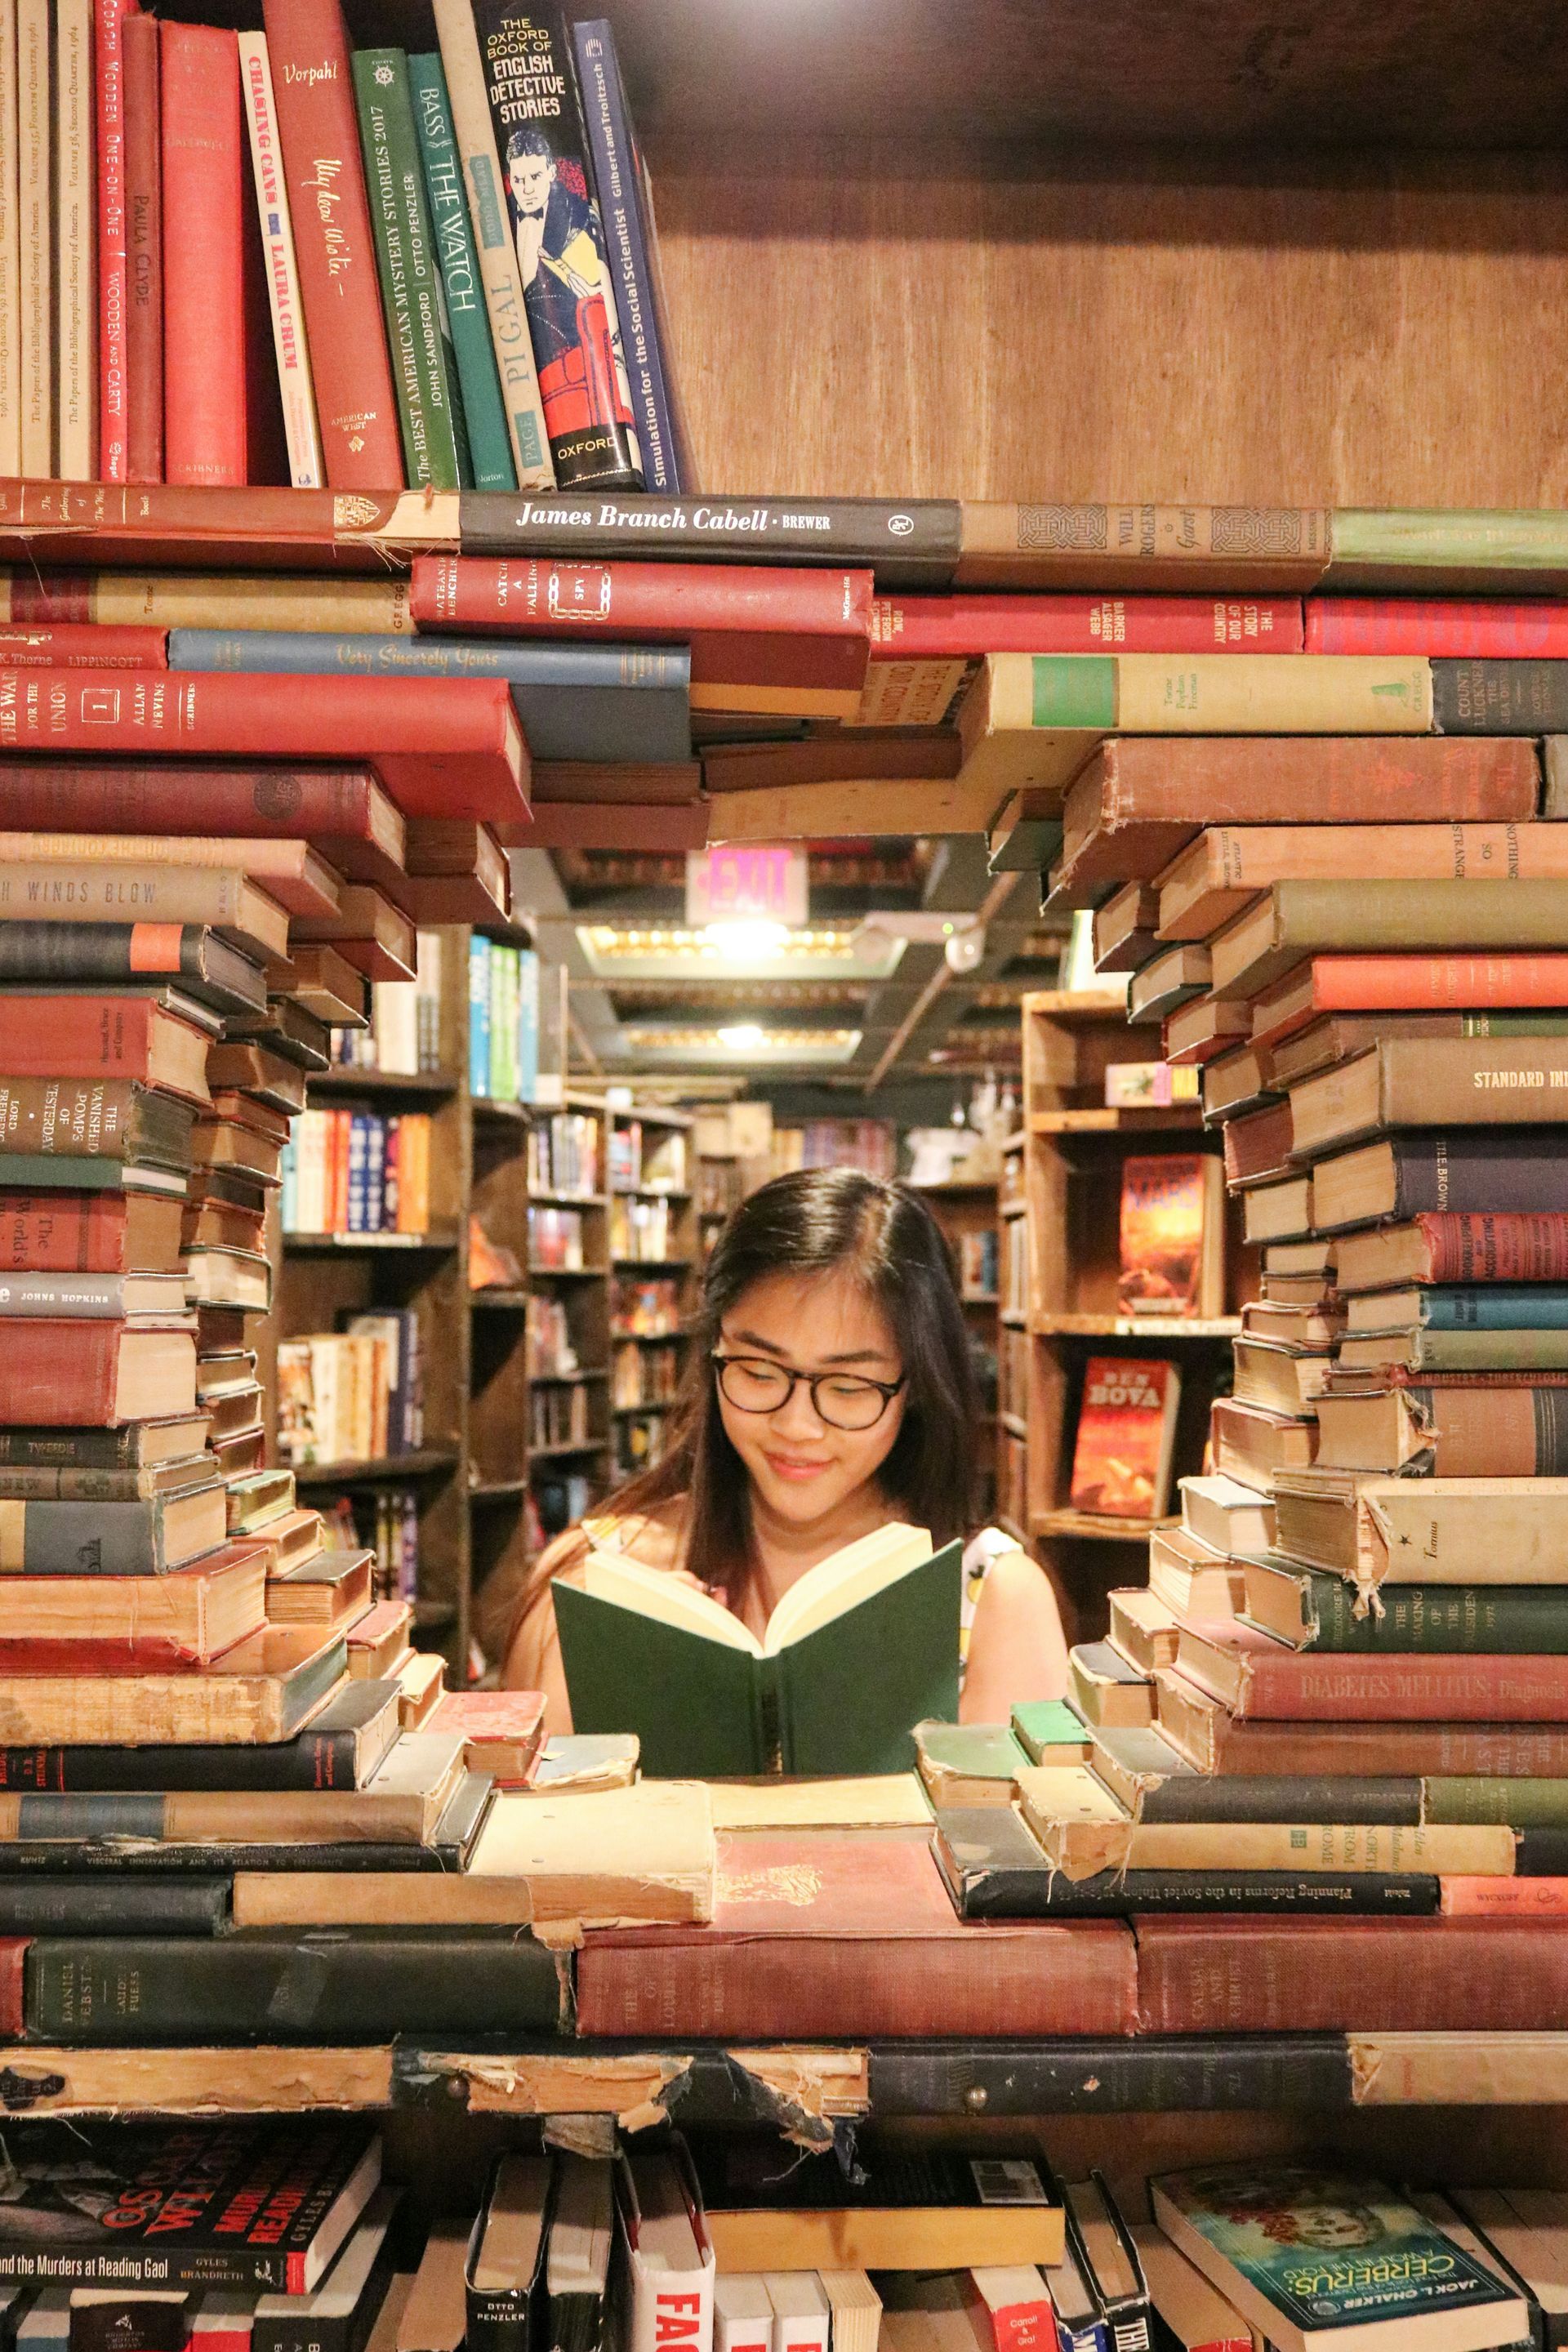 A woman is reading a book in a library surrounded by books.